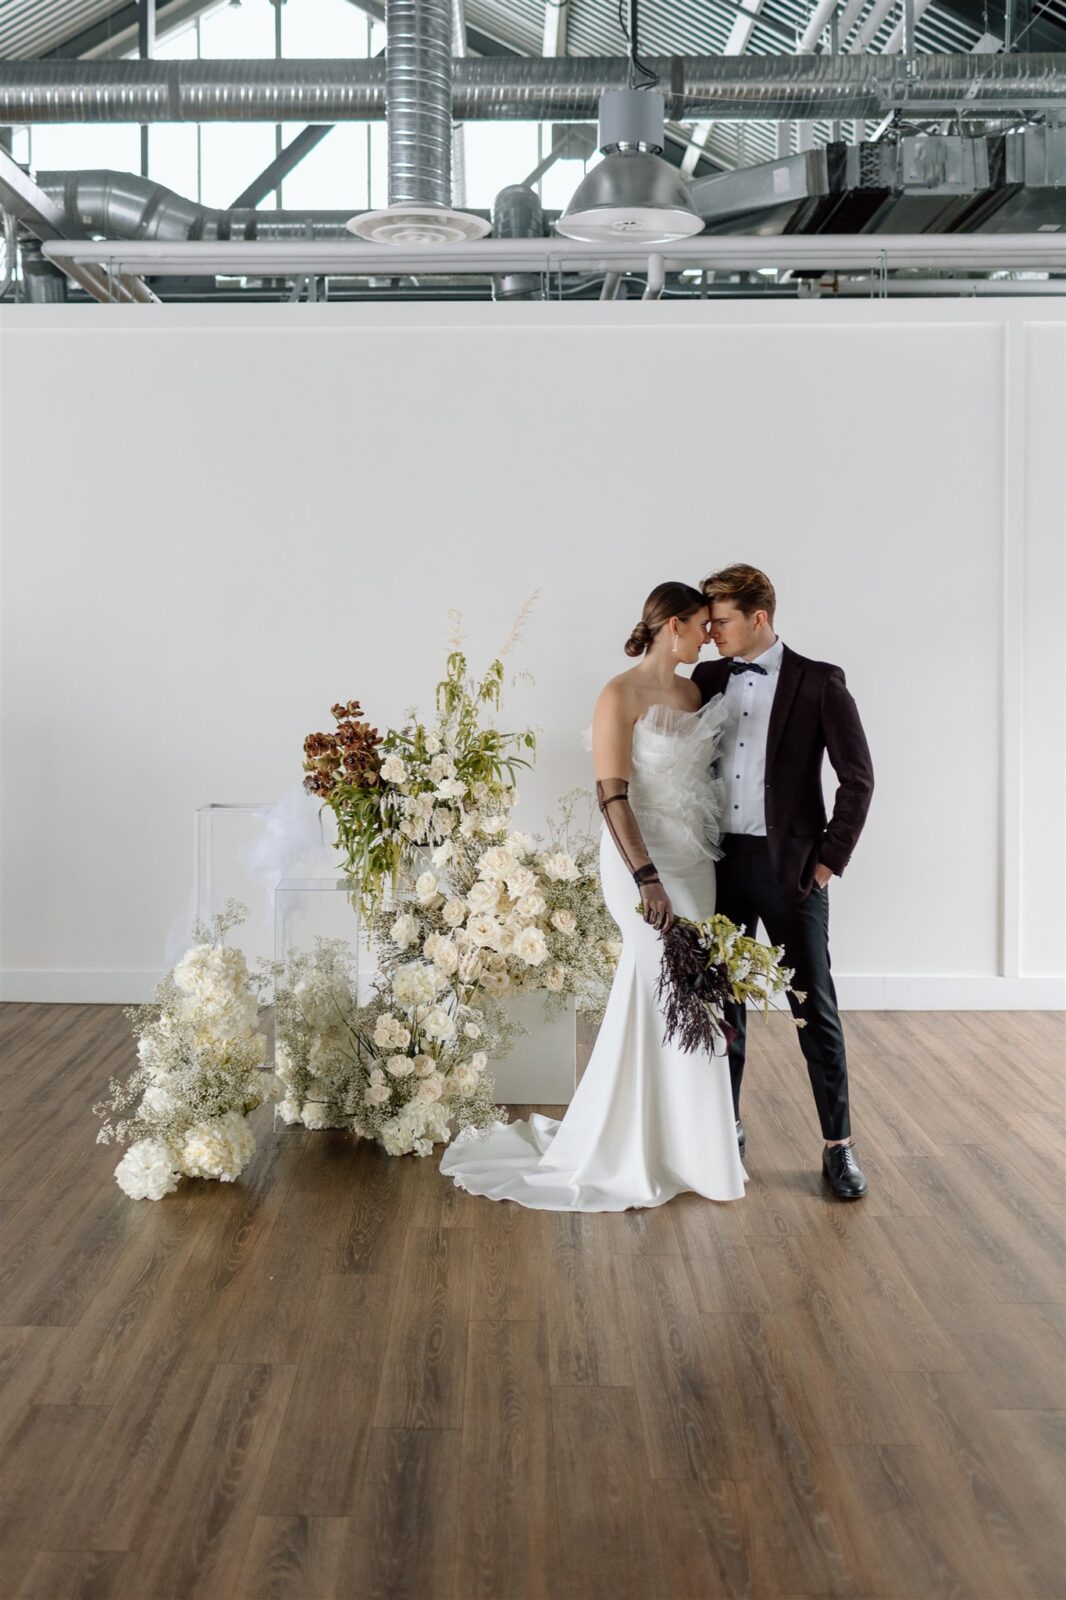 Couple embracing during sophisticated and minimalist wedding at The Wallace Venue in Vancouver, BC. Featuring stunning plum and white florals by Celsia Florals.